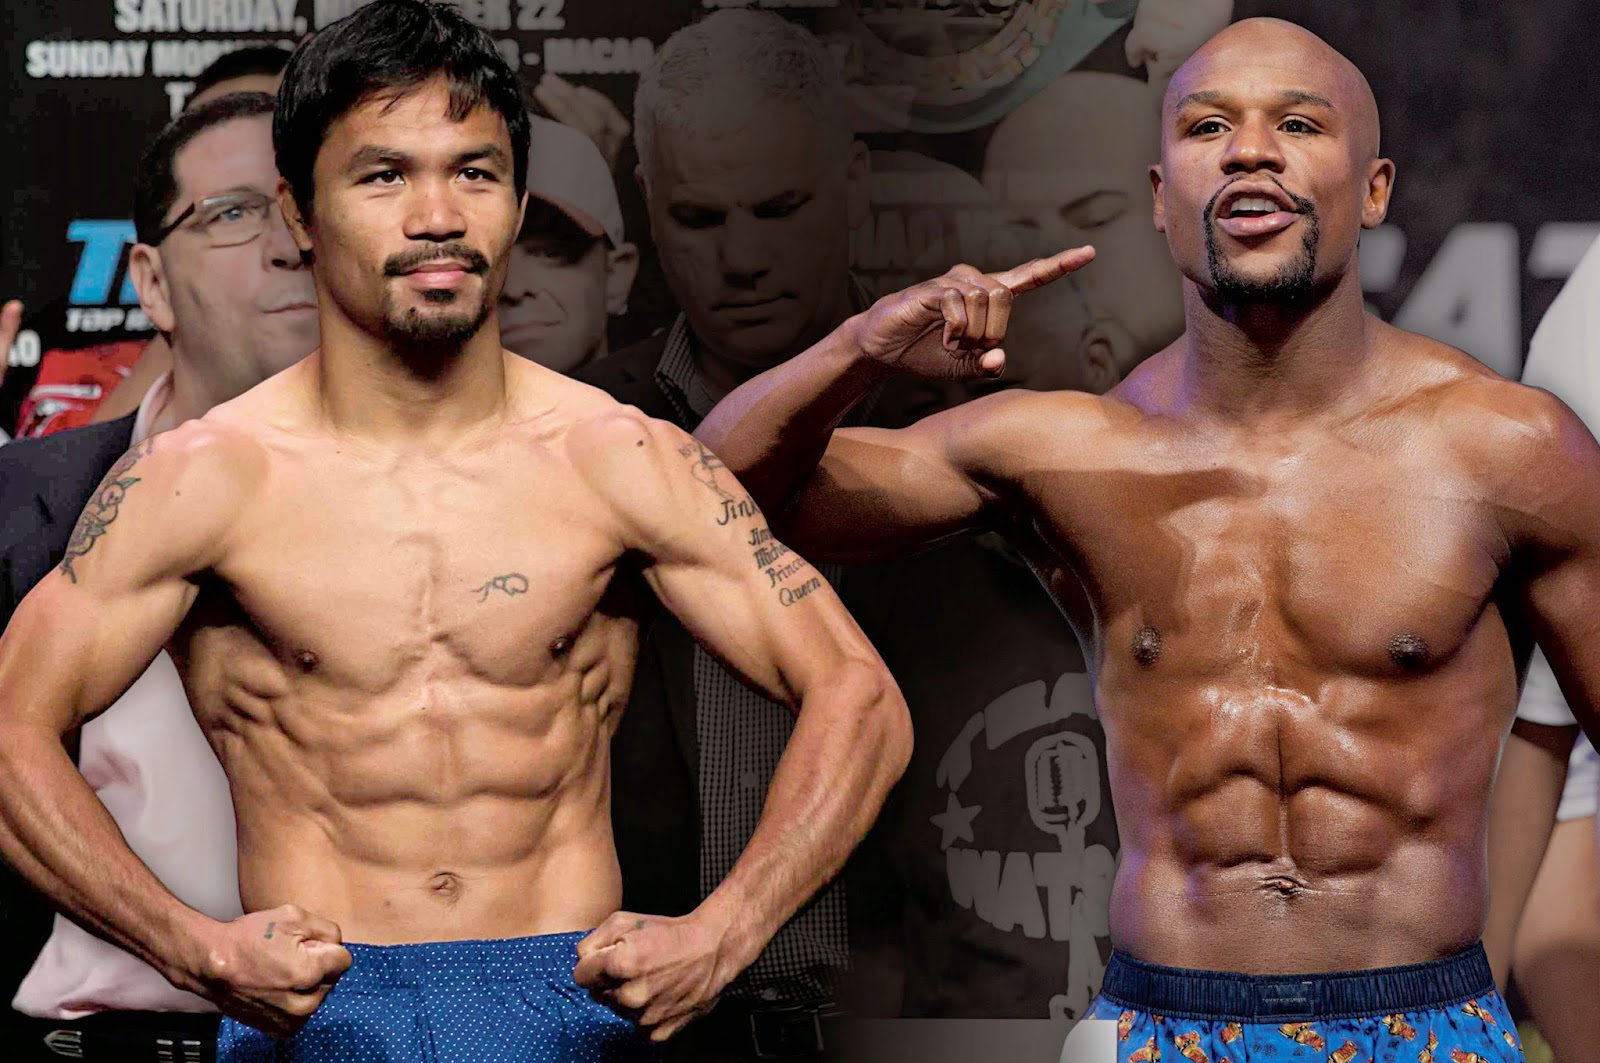 Free Online Streaming For Mayweather VS Pacquiao Fight?